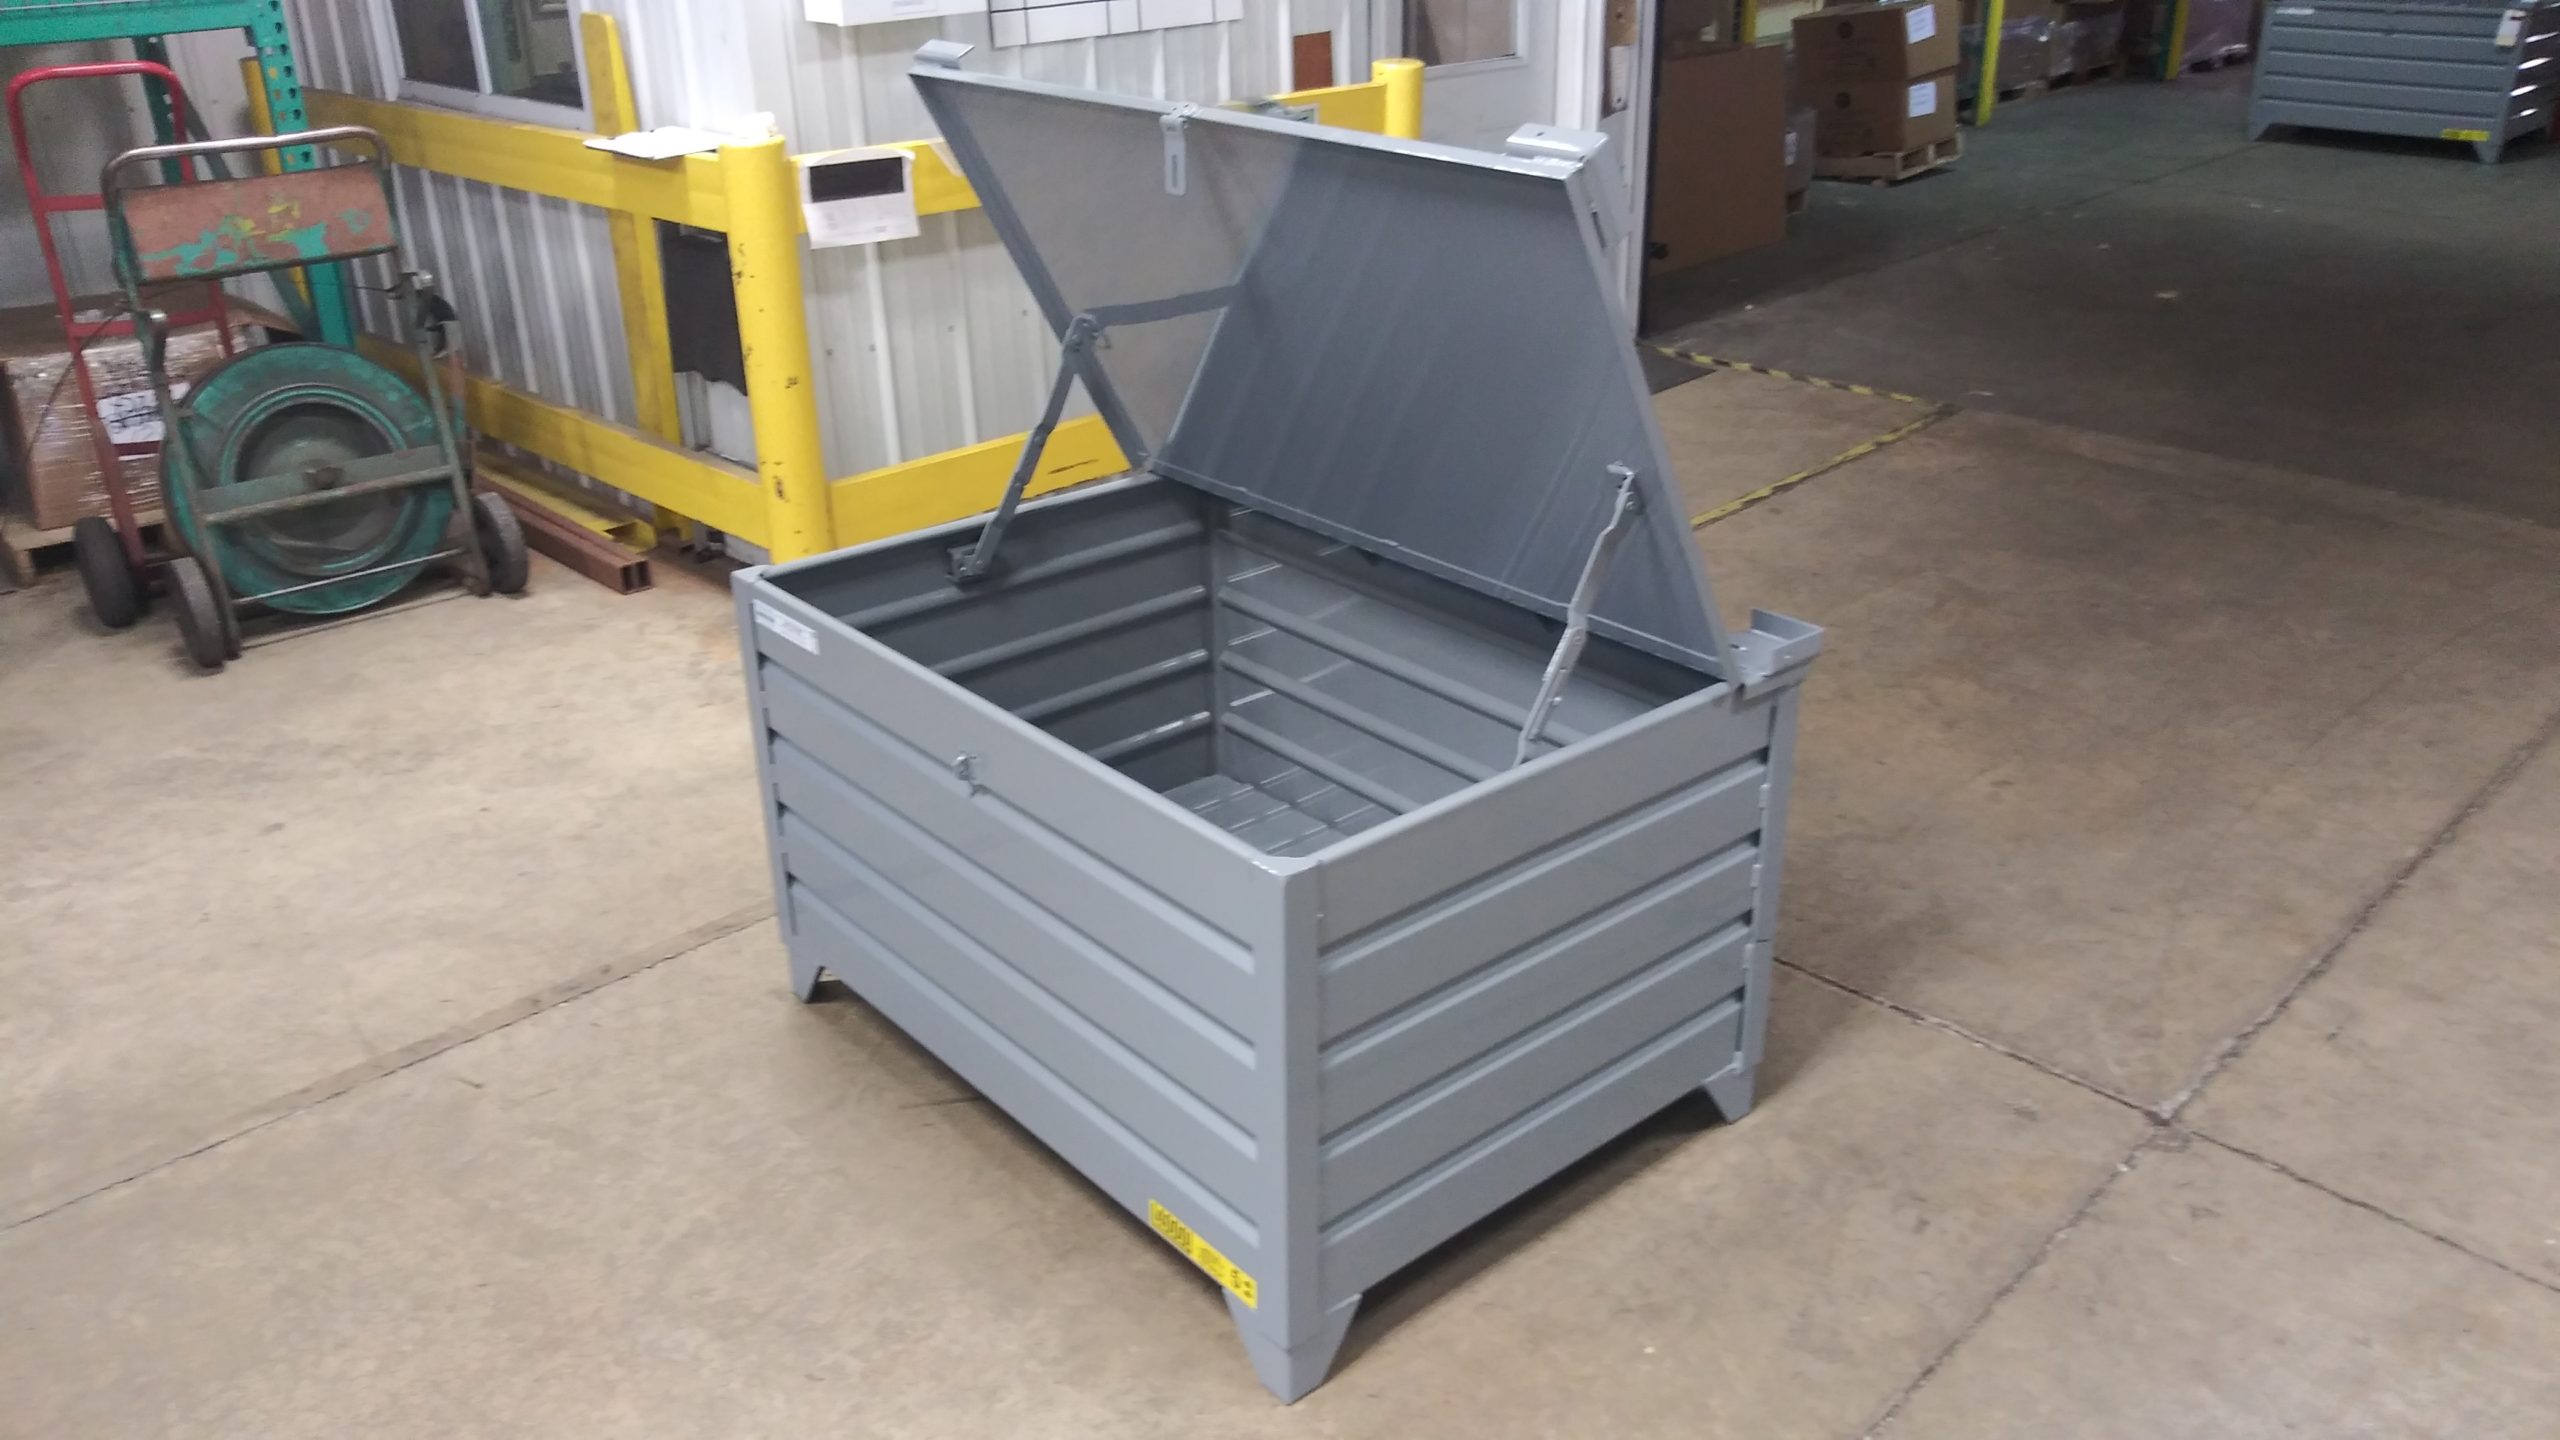 https://rackandshelf.com/wp-content/uploads/CM37682-35x48x24-Corrugated-Steel-Container-w-Hinged-Lid-scaled.jpg